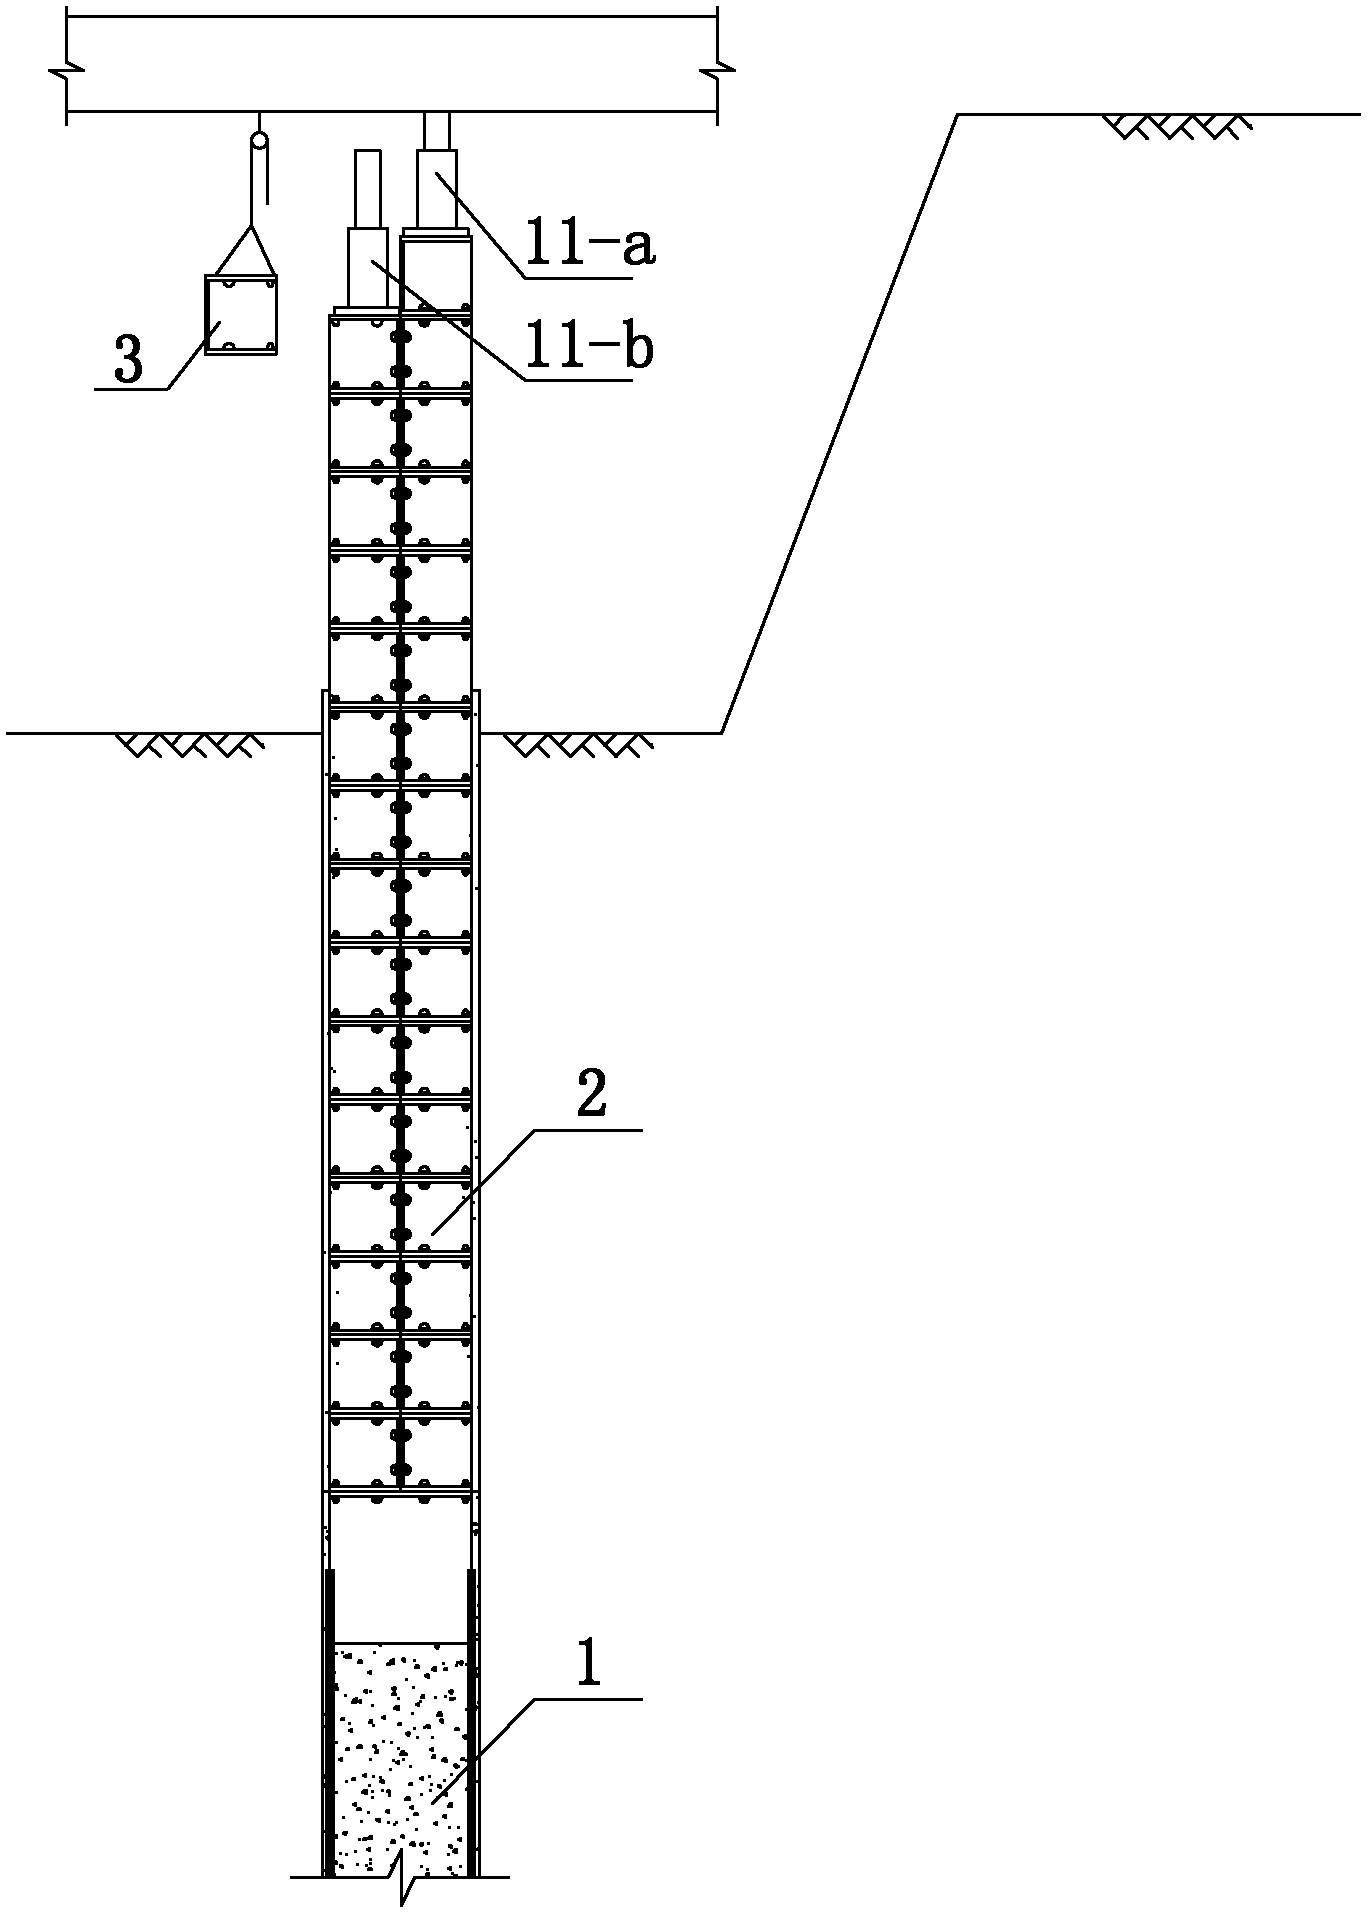 Reusable reinforced concrete composite pile available for on-load segmental disassembly and construction method of reusable reinforced concrete composite pile available for on-load segmental disassembly